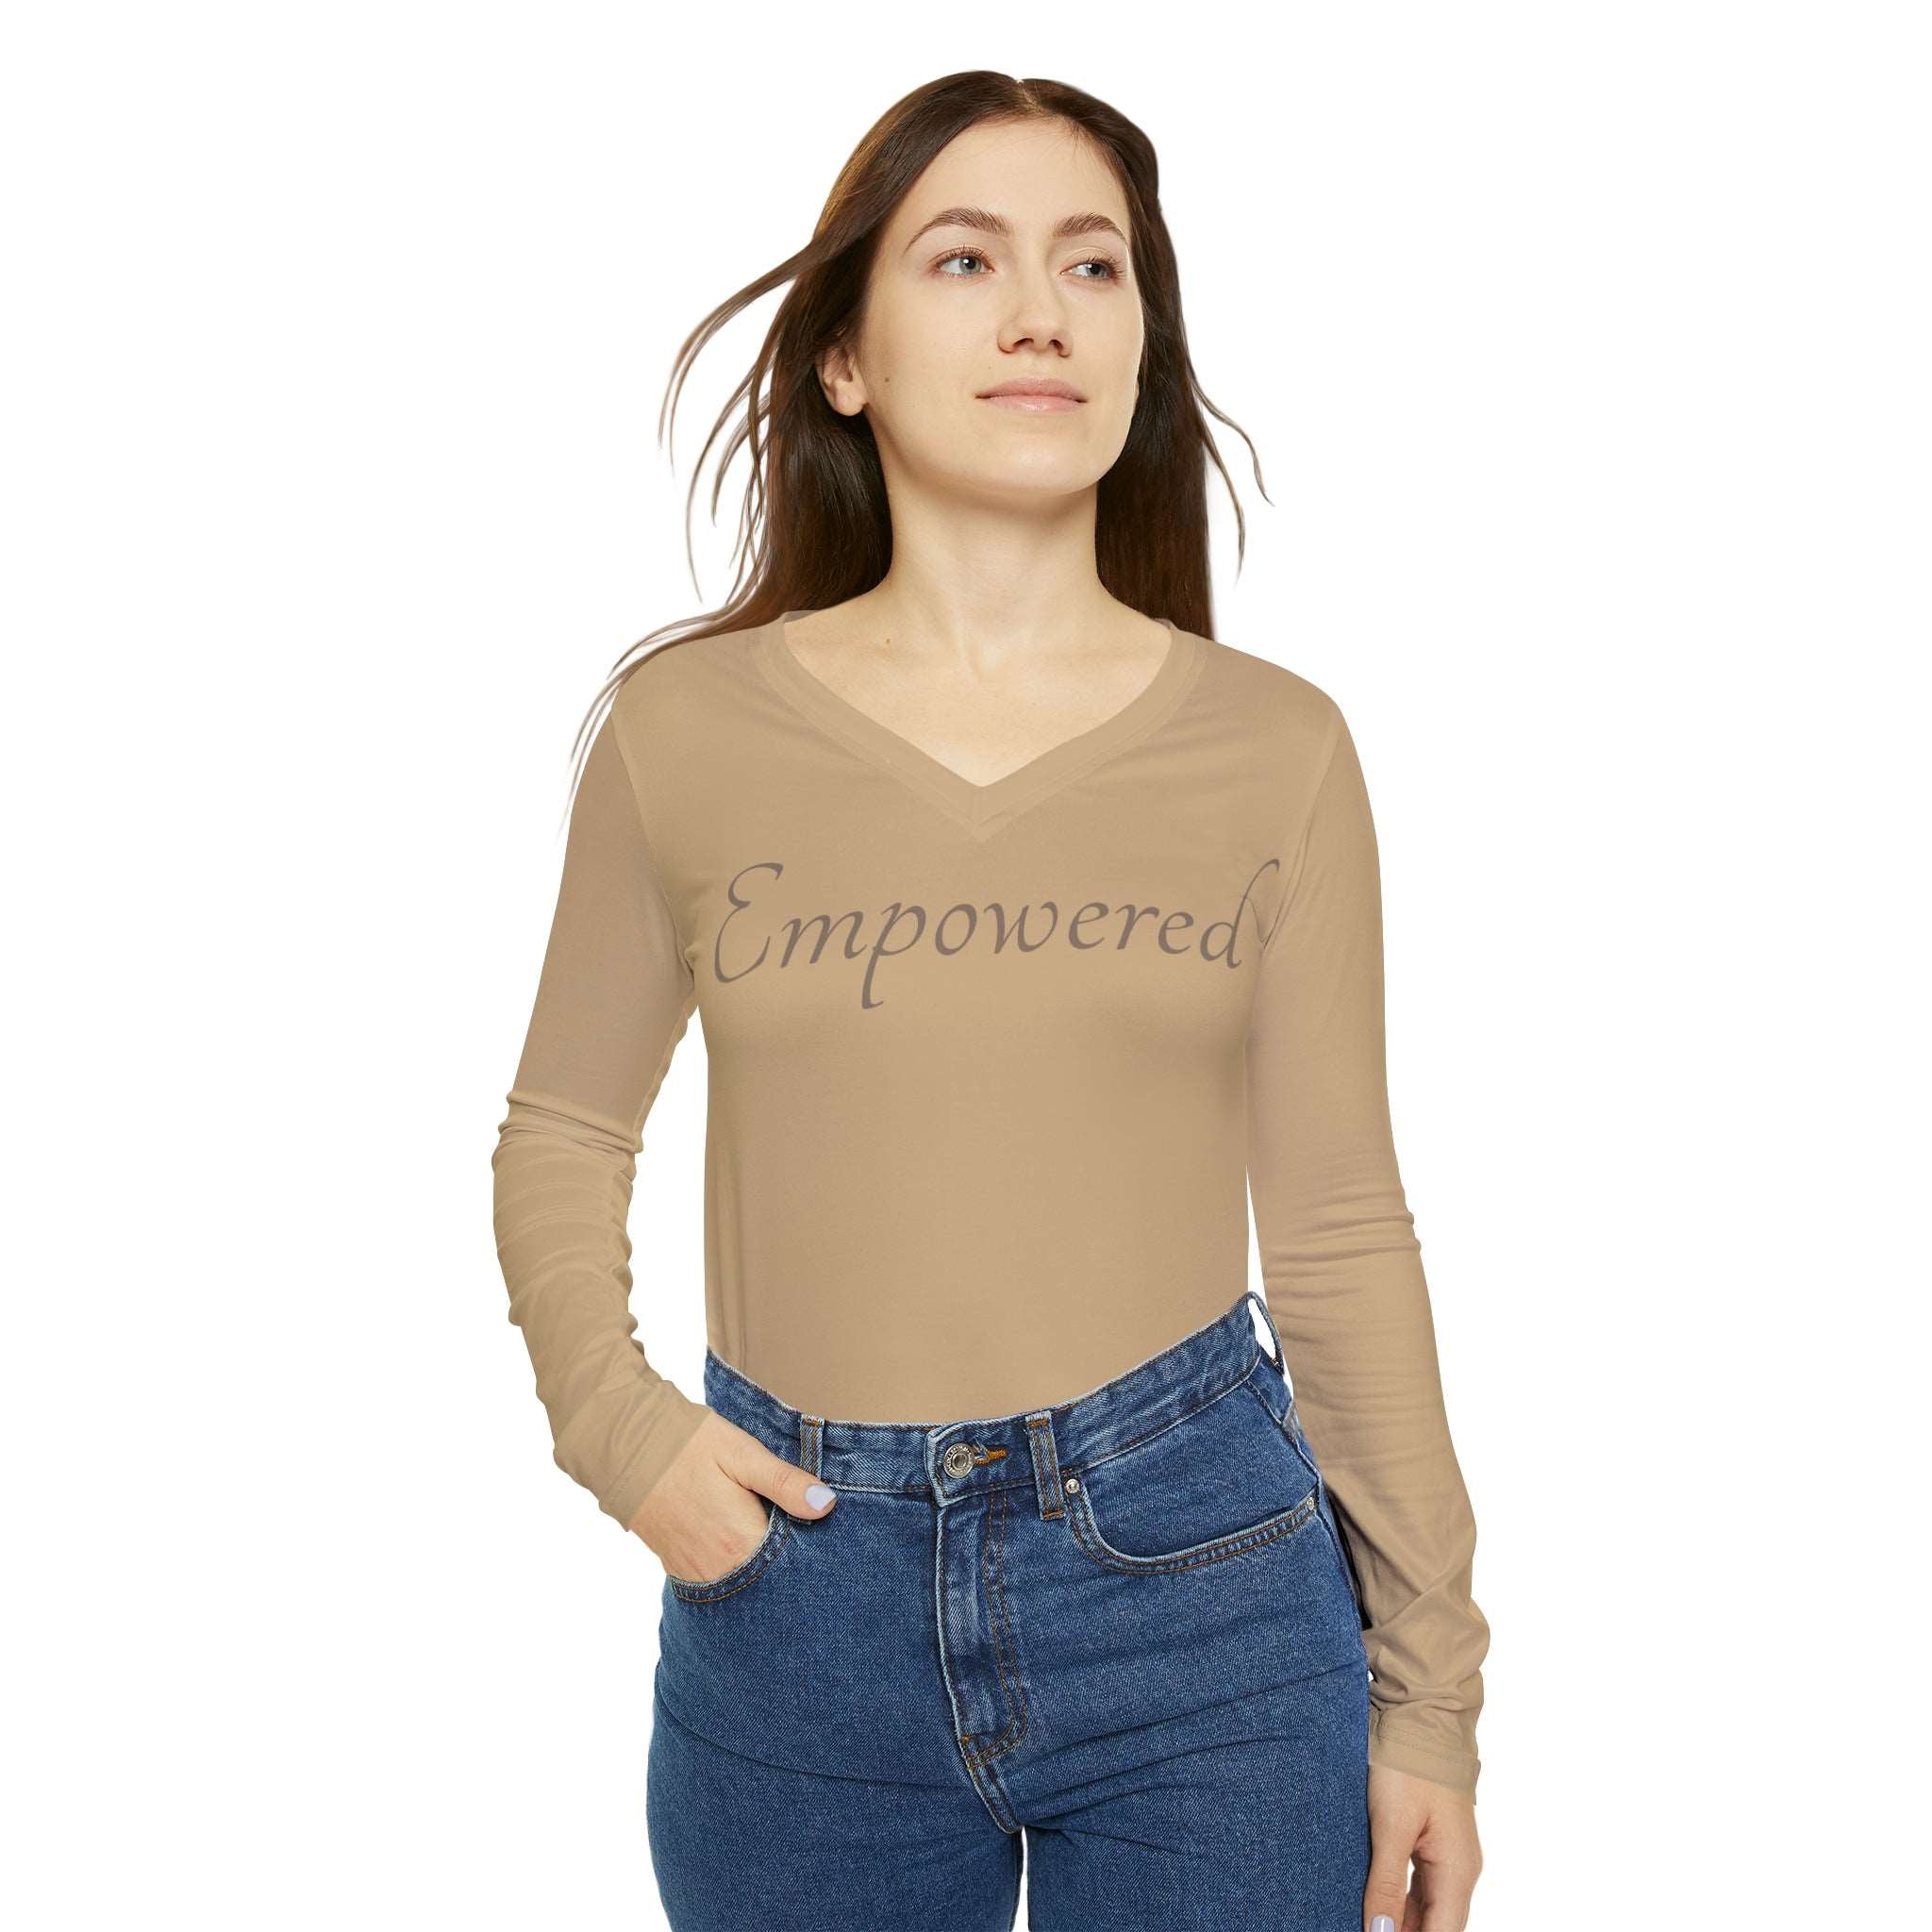 Empowered Long Sleeve V-neck: Comfort & Style Casual Shirt Double Needle Stitching Empowerment Shirt Everyday Wear Long Sleeve V-neck Mental Health Support Polyester Spandex Blend Statement Shirt Tee for Women All Over Prints 16466536358325007959_2048_069177c1-1fe0-4f67-8eac-0e4b52f30f90 Printify